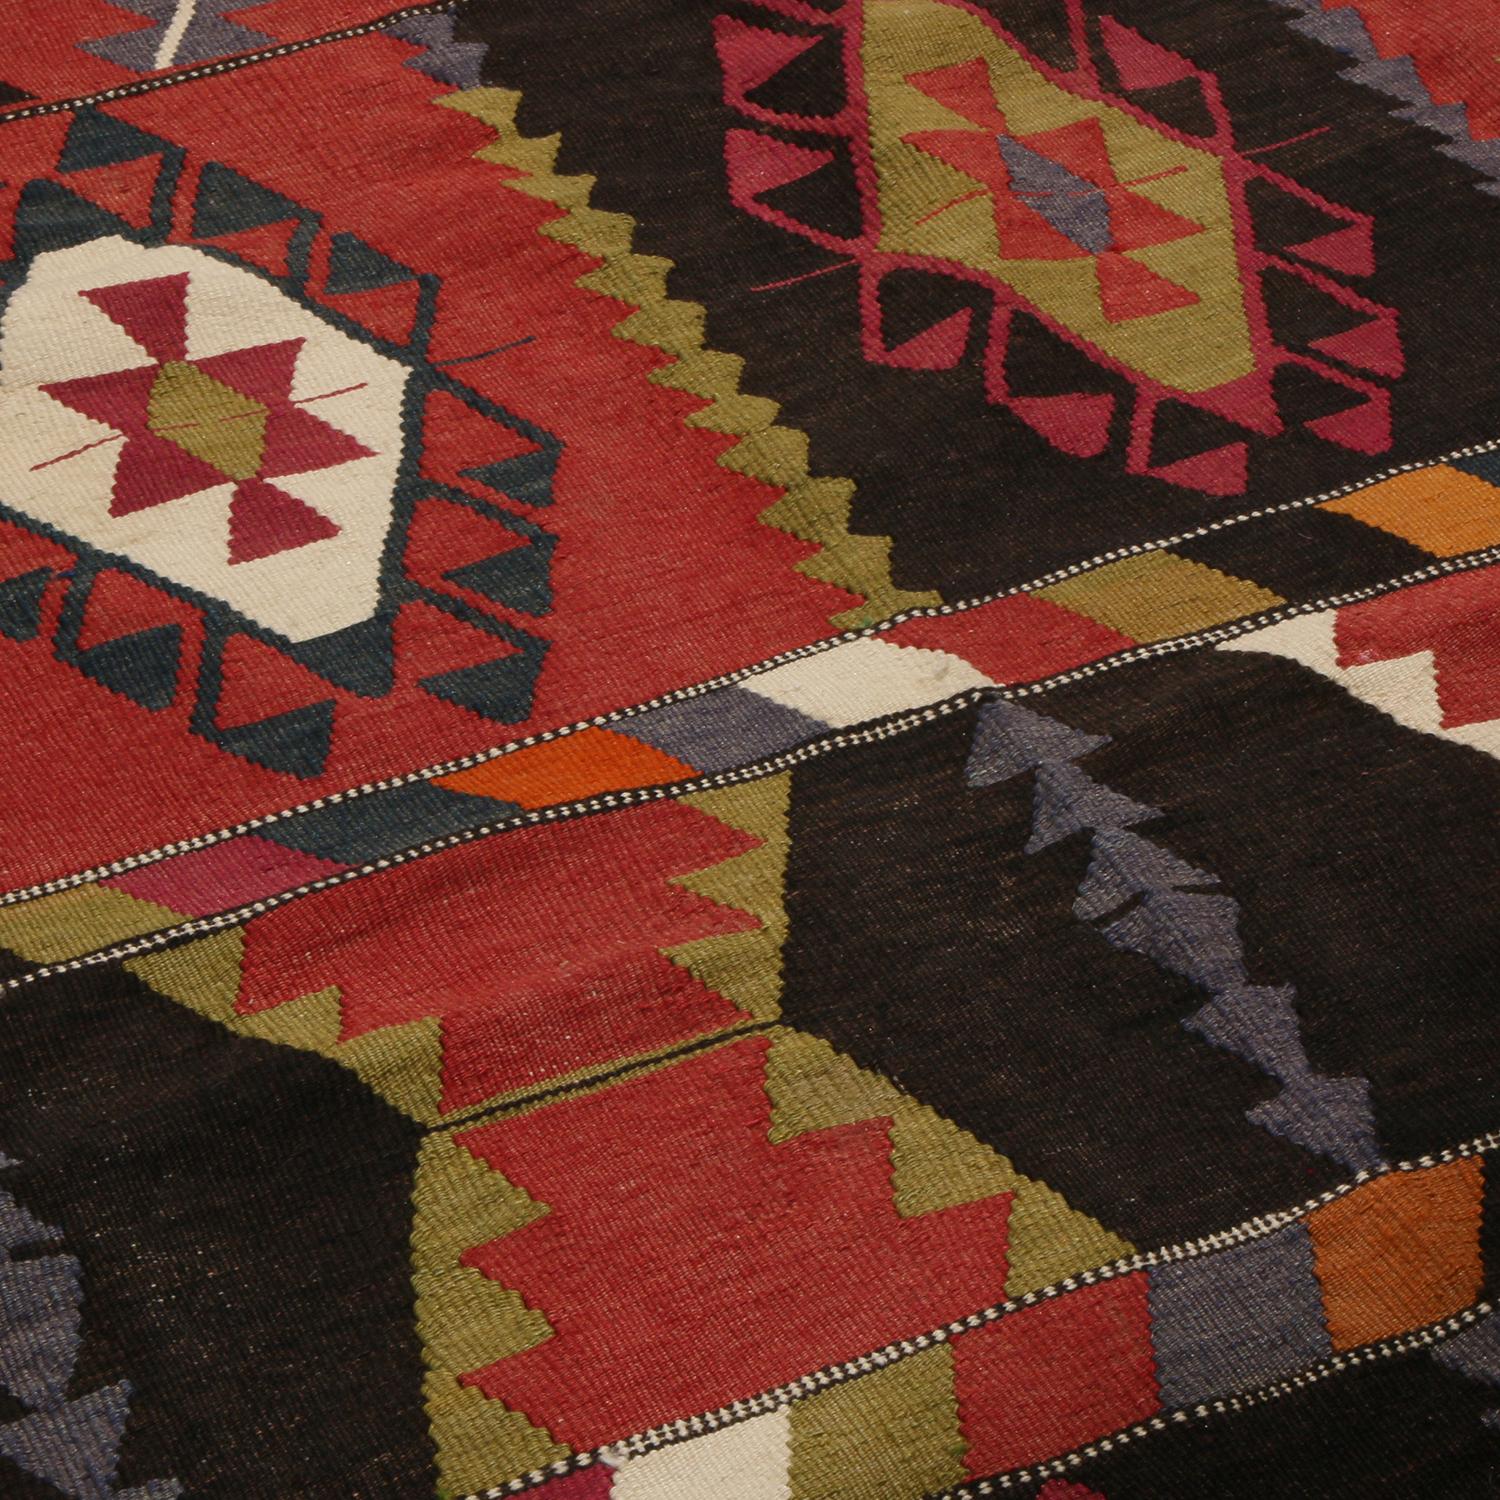 Hand-Woven Vintage Esme Geometric Red and Black Wool Kilim Rug with Green and Blue Accents